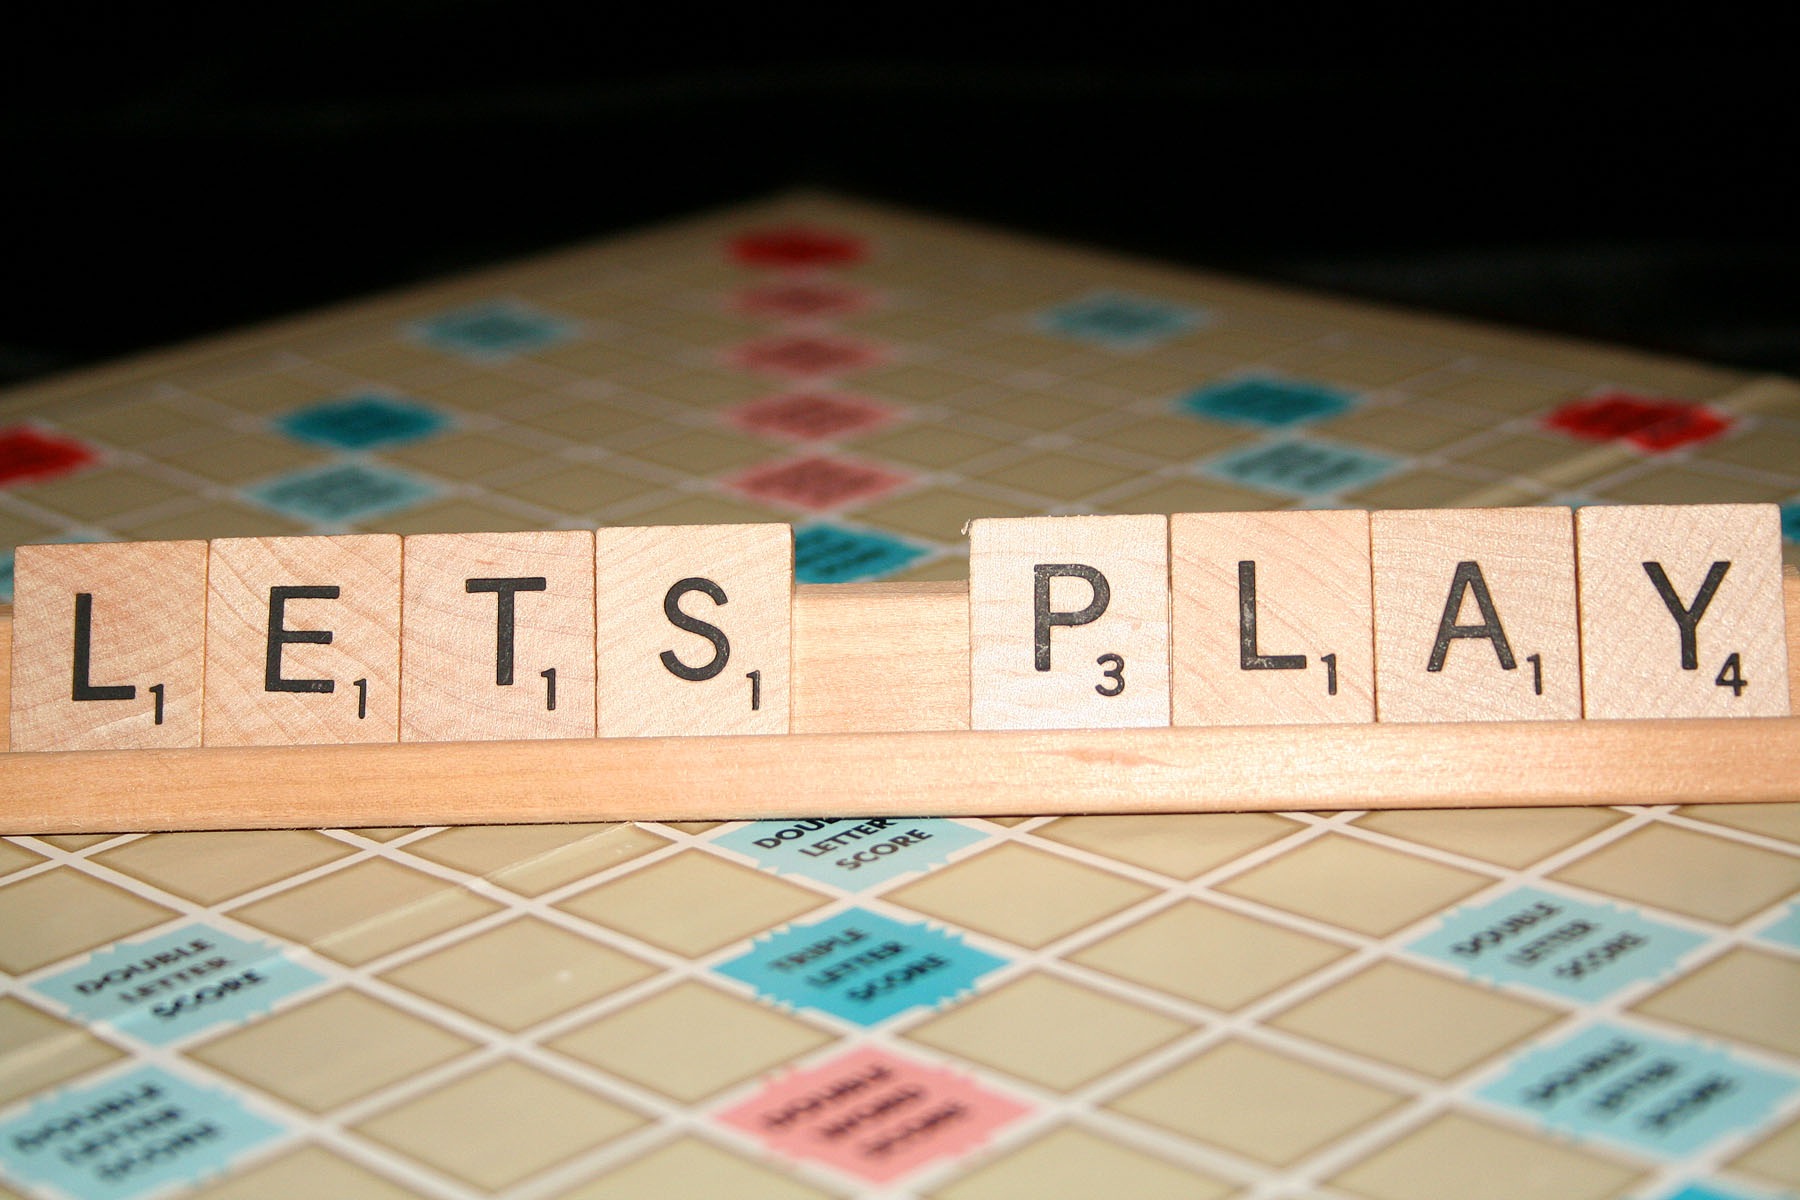 Lovers Of The Classic Game Scrabble Can Look Forward To The Addiction